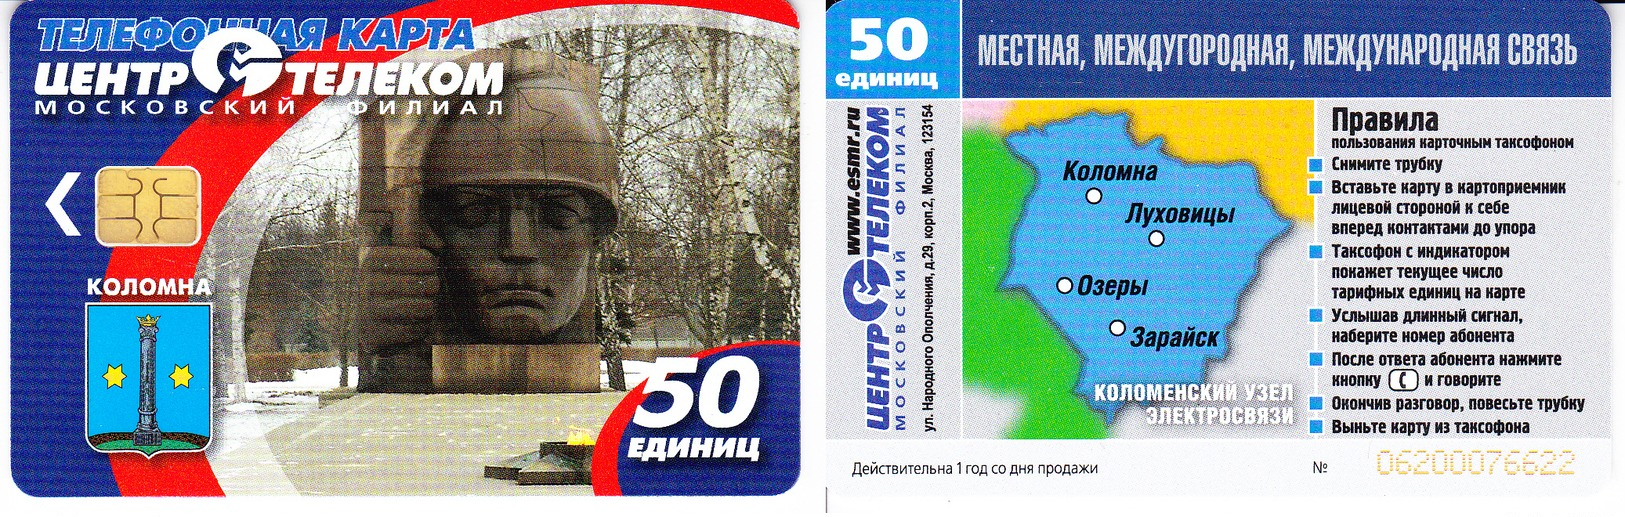 Phonecard   Russia. Moscow   Region. Kolomna  50 Units  Limited  Edition  R - Russia